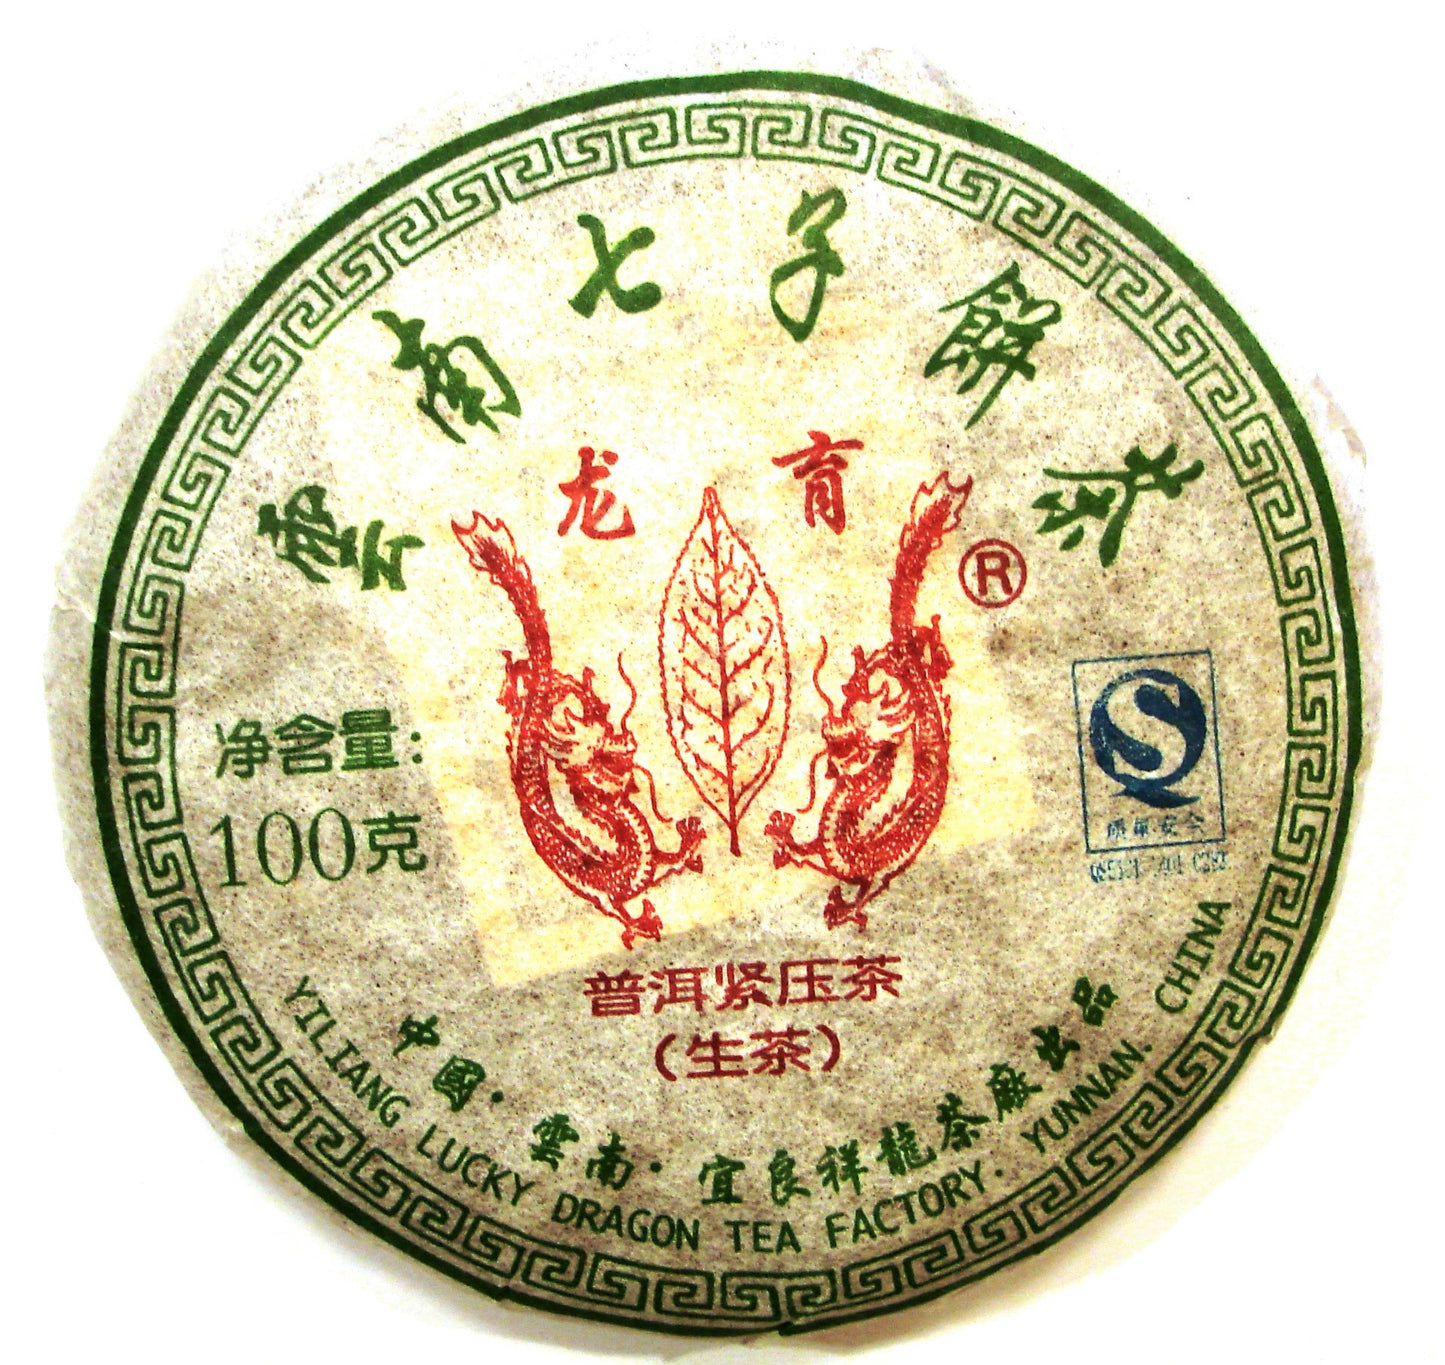 Lucky Dragon Chinese Sheng pu-erh tea cake in white packaging with green characters and red design